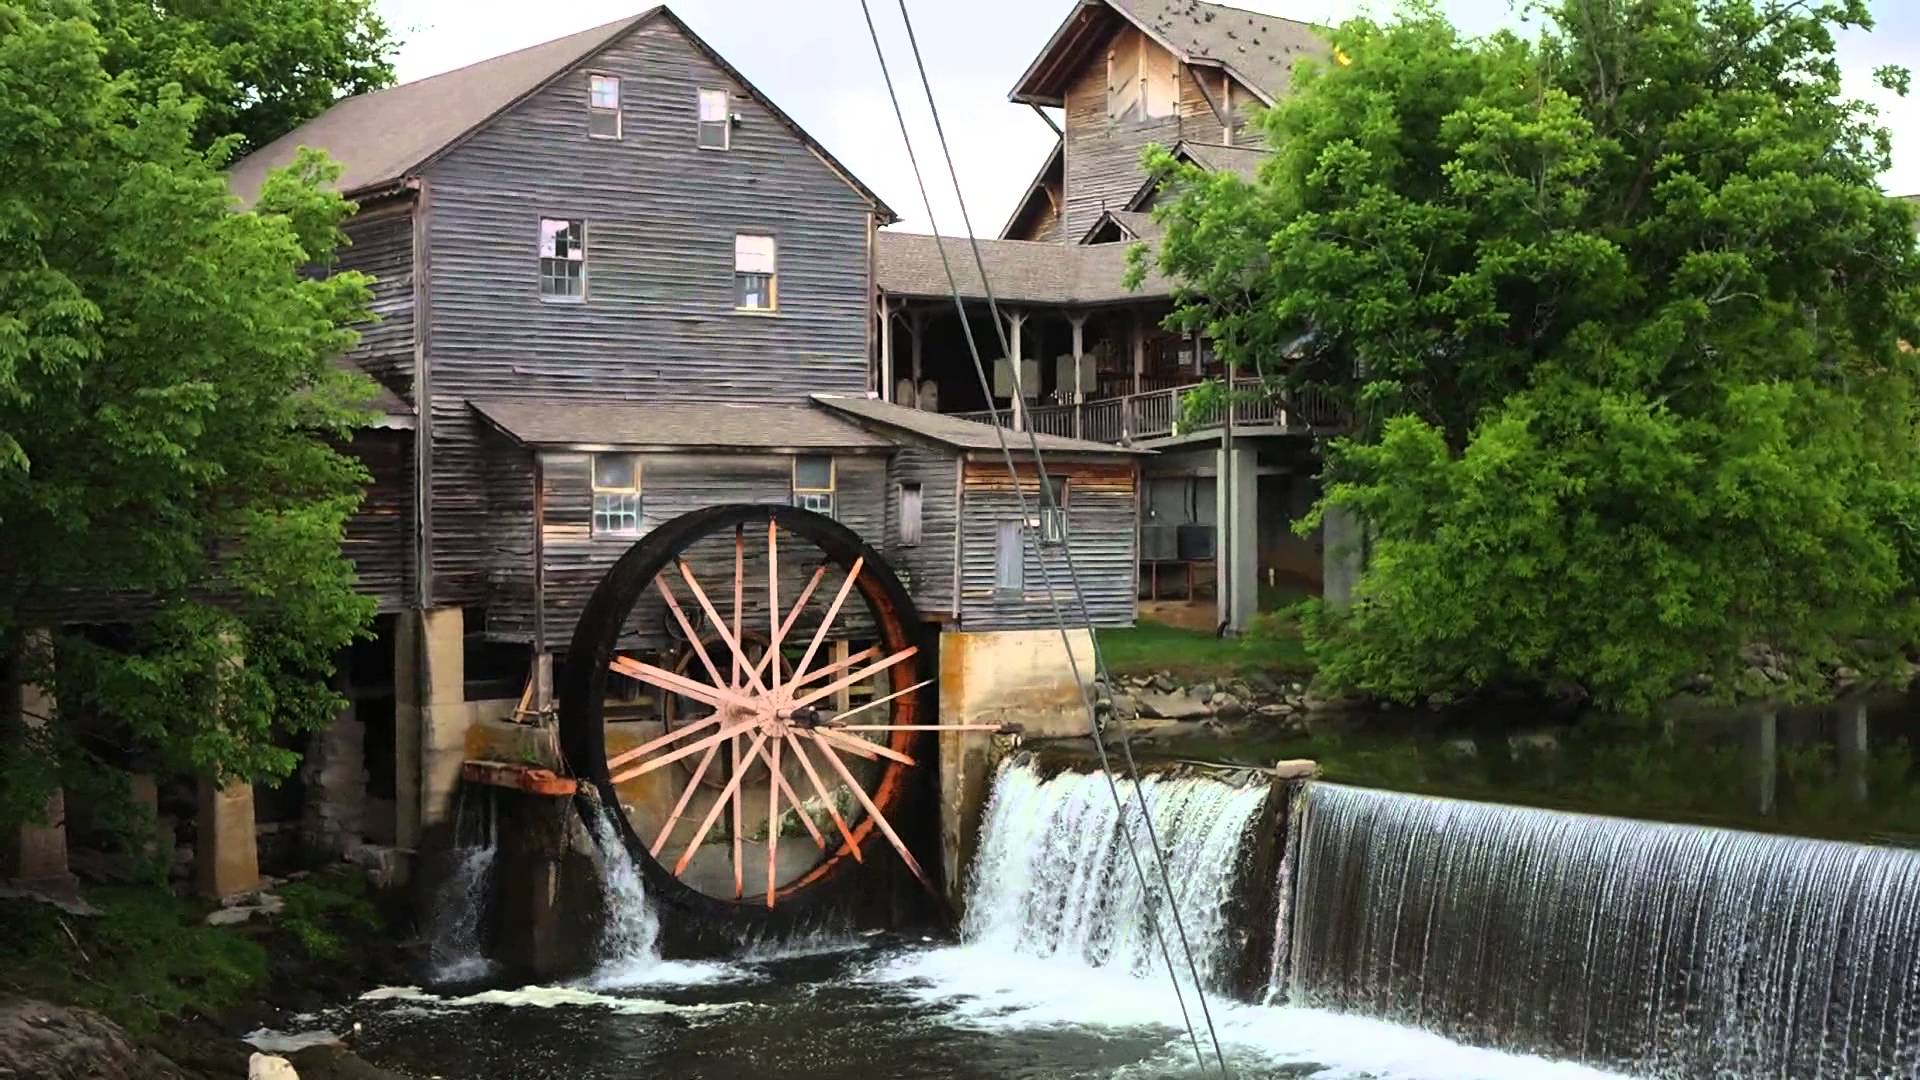 The Old Mill restaurant / store Pigeon Forge Tennessee - YouTube